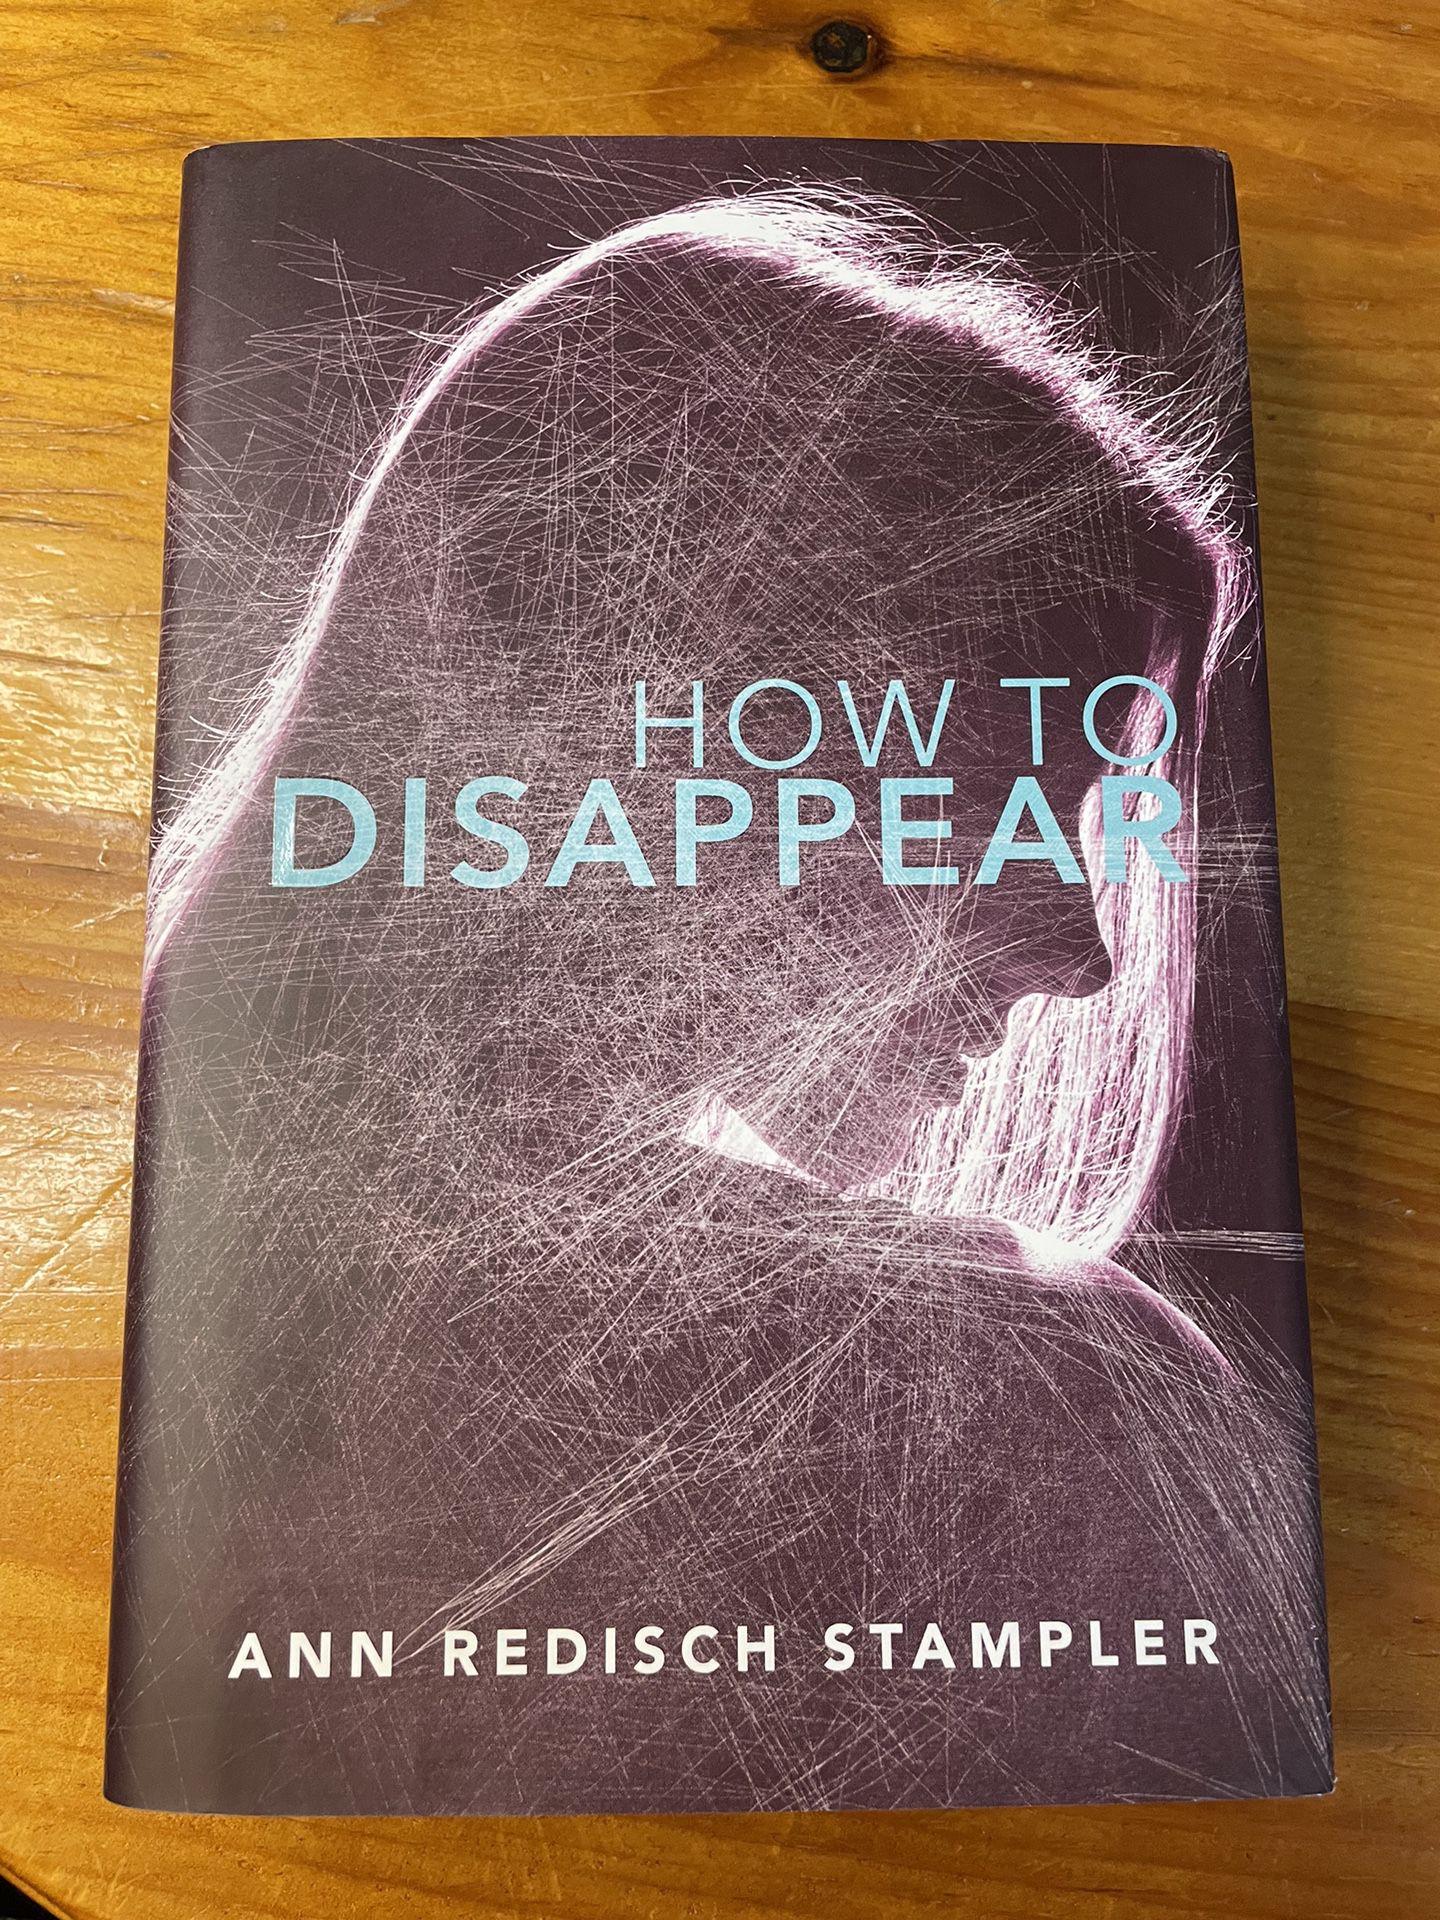 “How To Disappear” By Ann Redisch Stampler